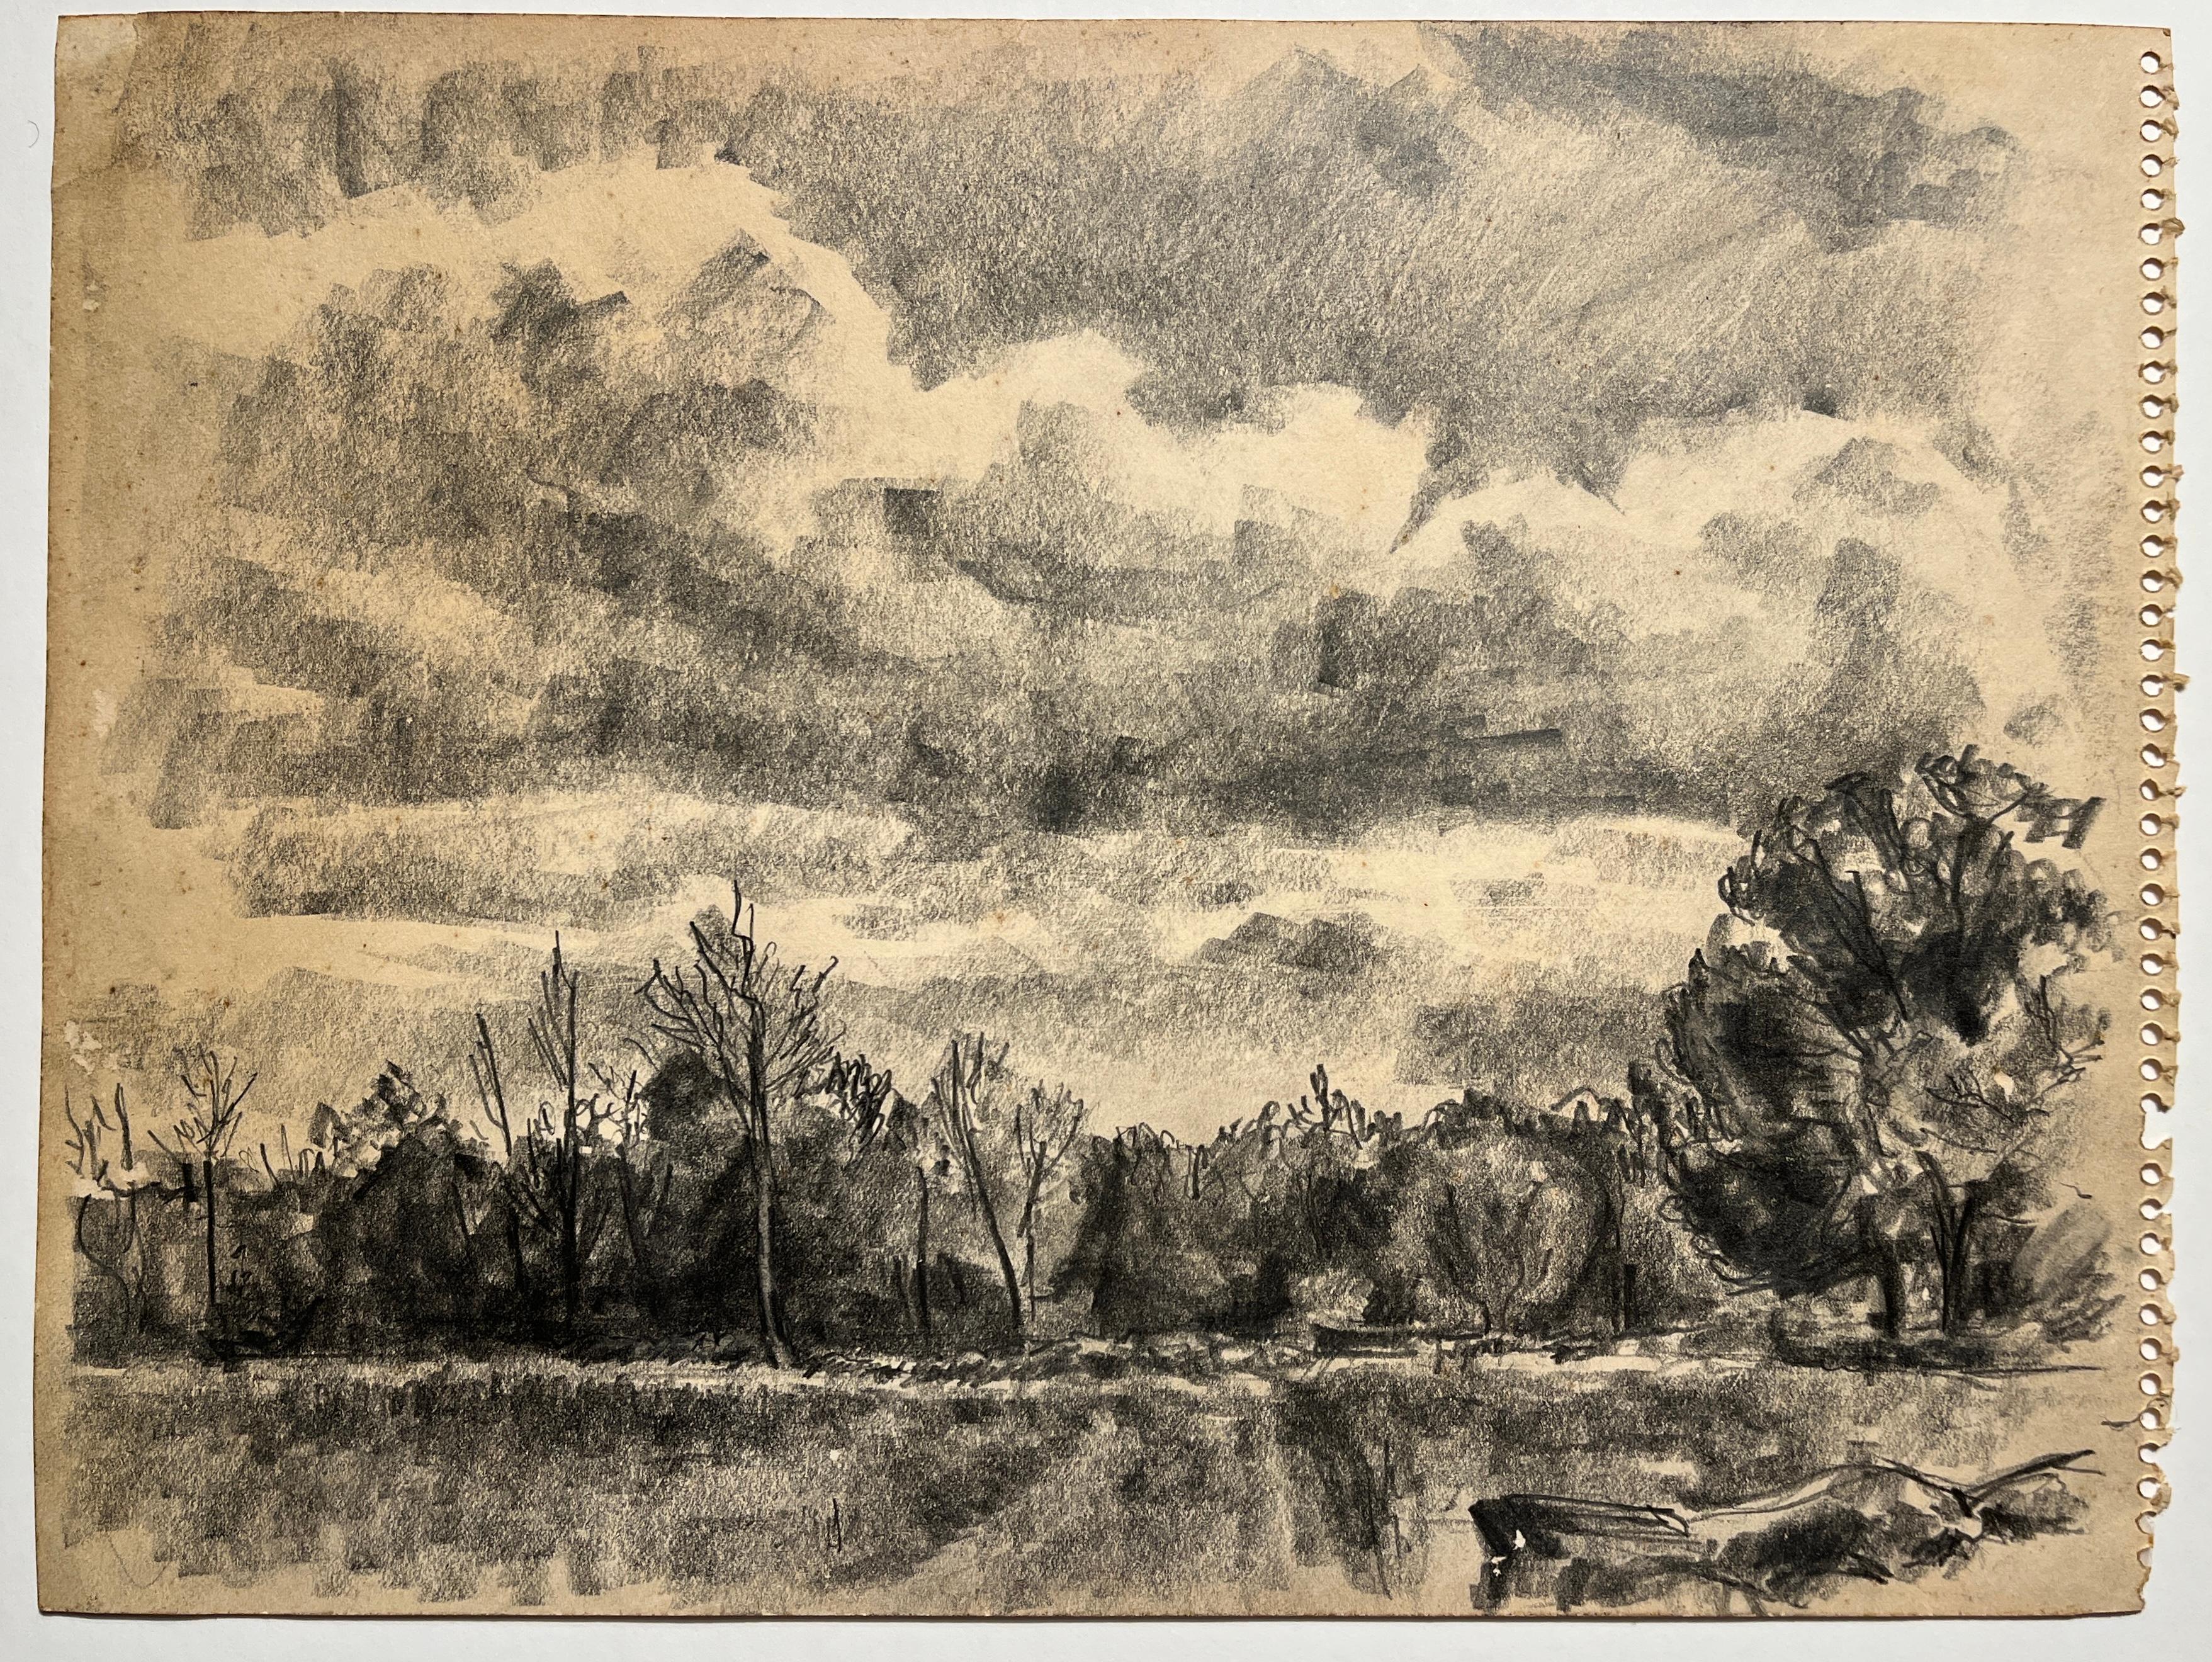 Unknown Landscape Art - "Charcoal and Pencil Country Landscape" Drawing